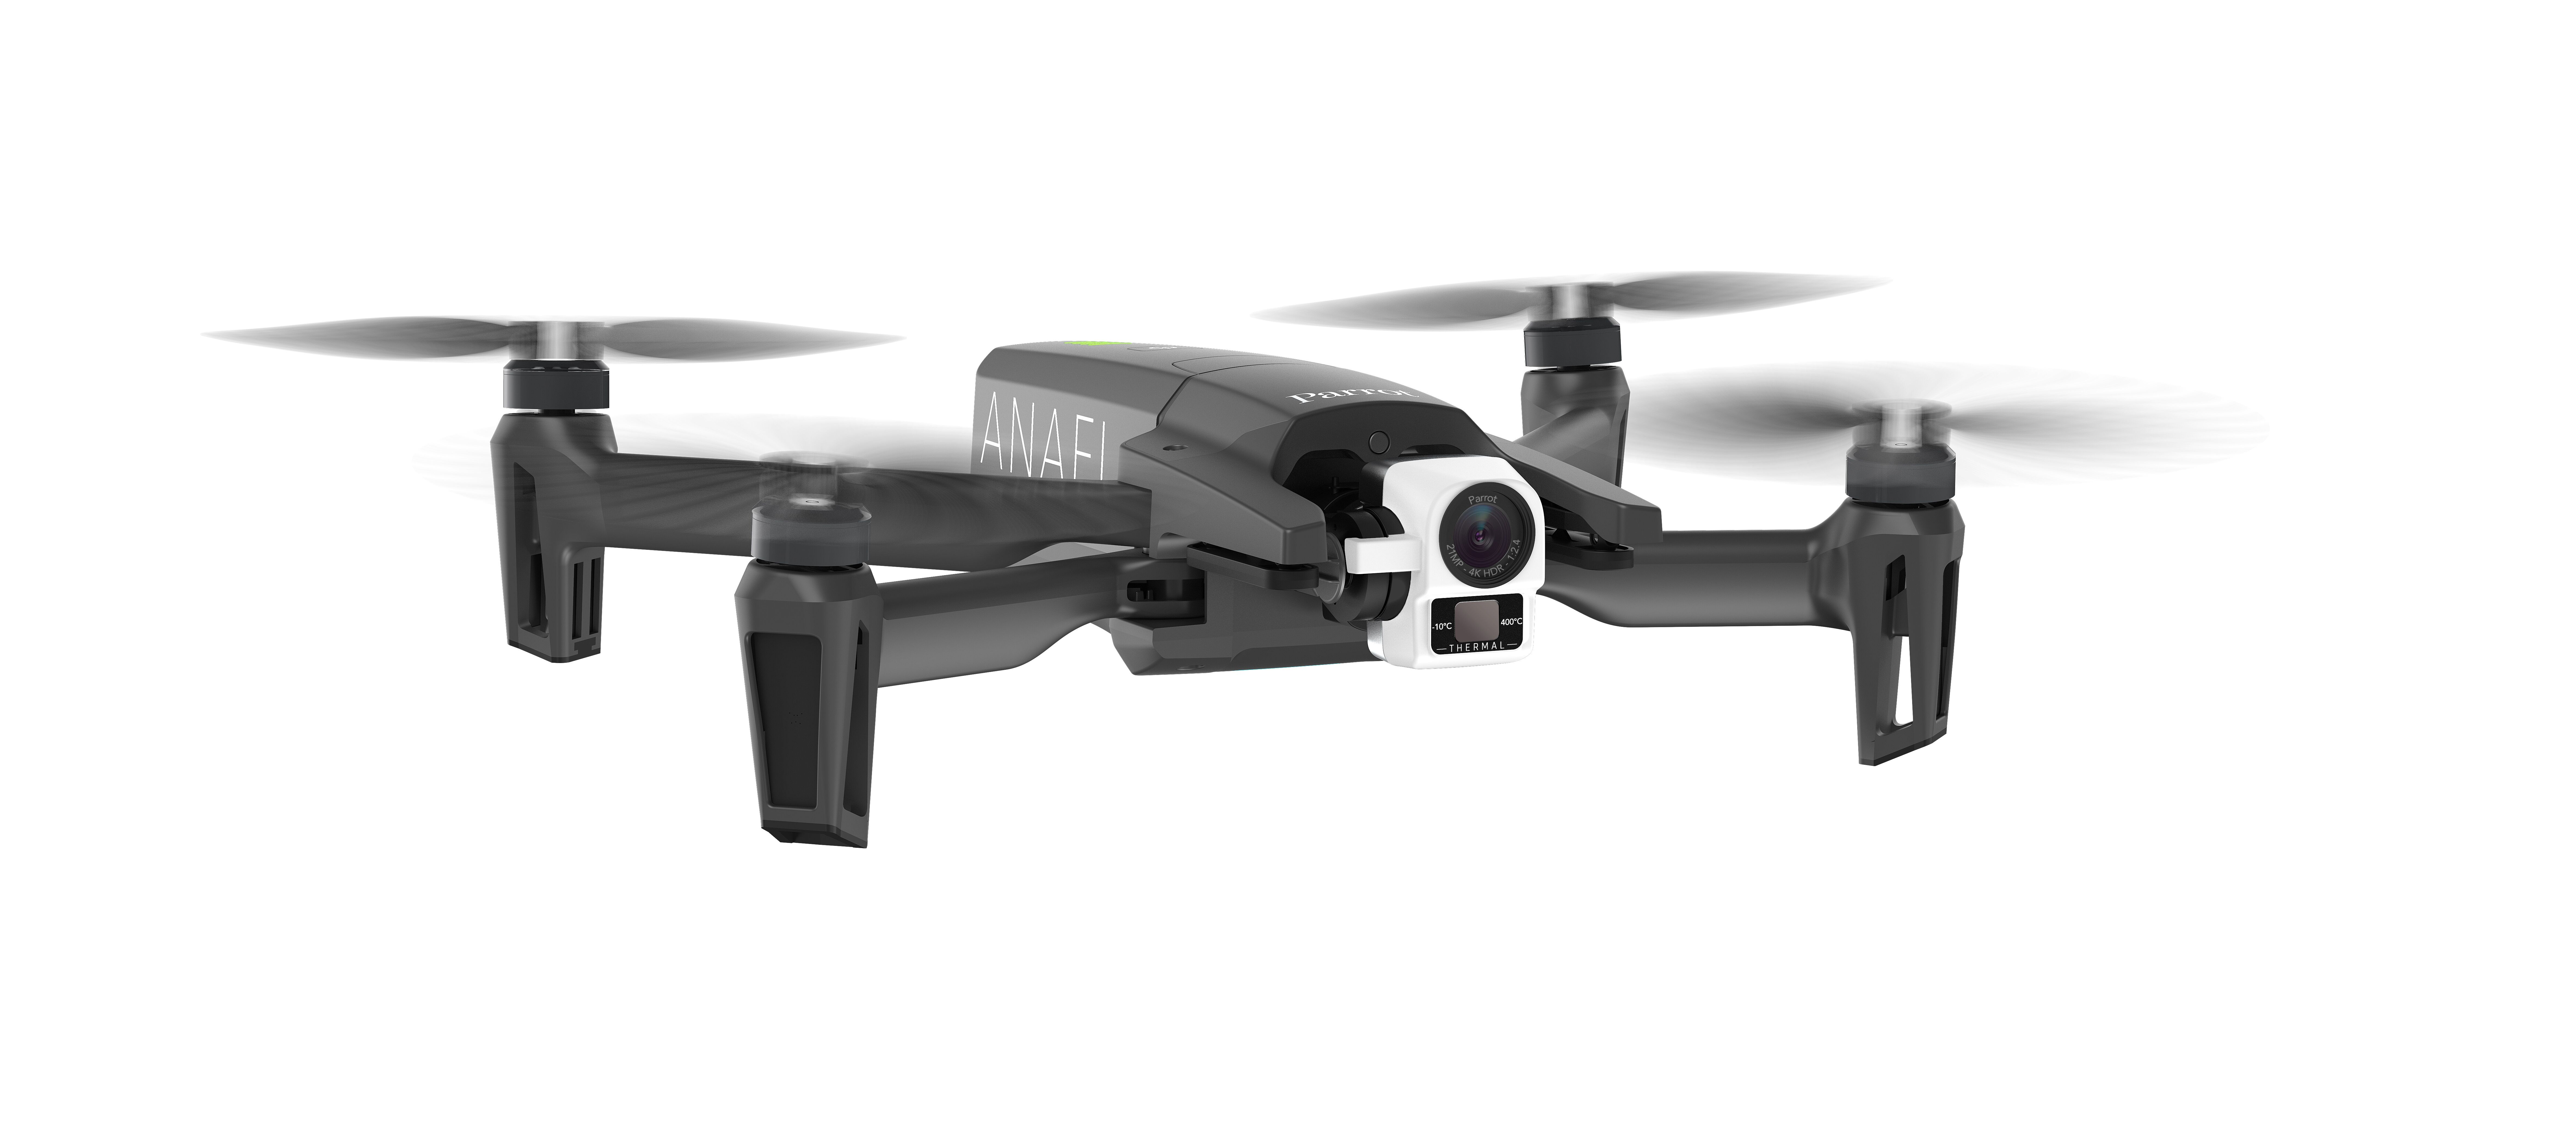 The Parrot ANAFI Thermal Drone Does Thermal Imaging